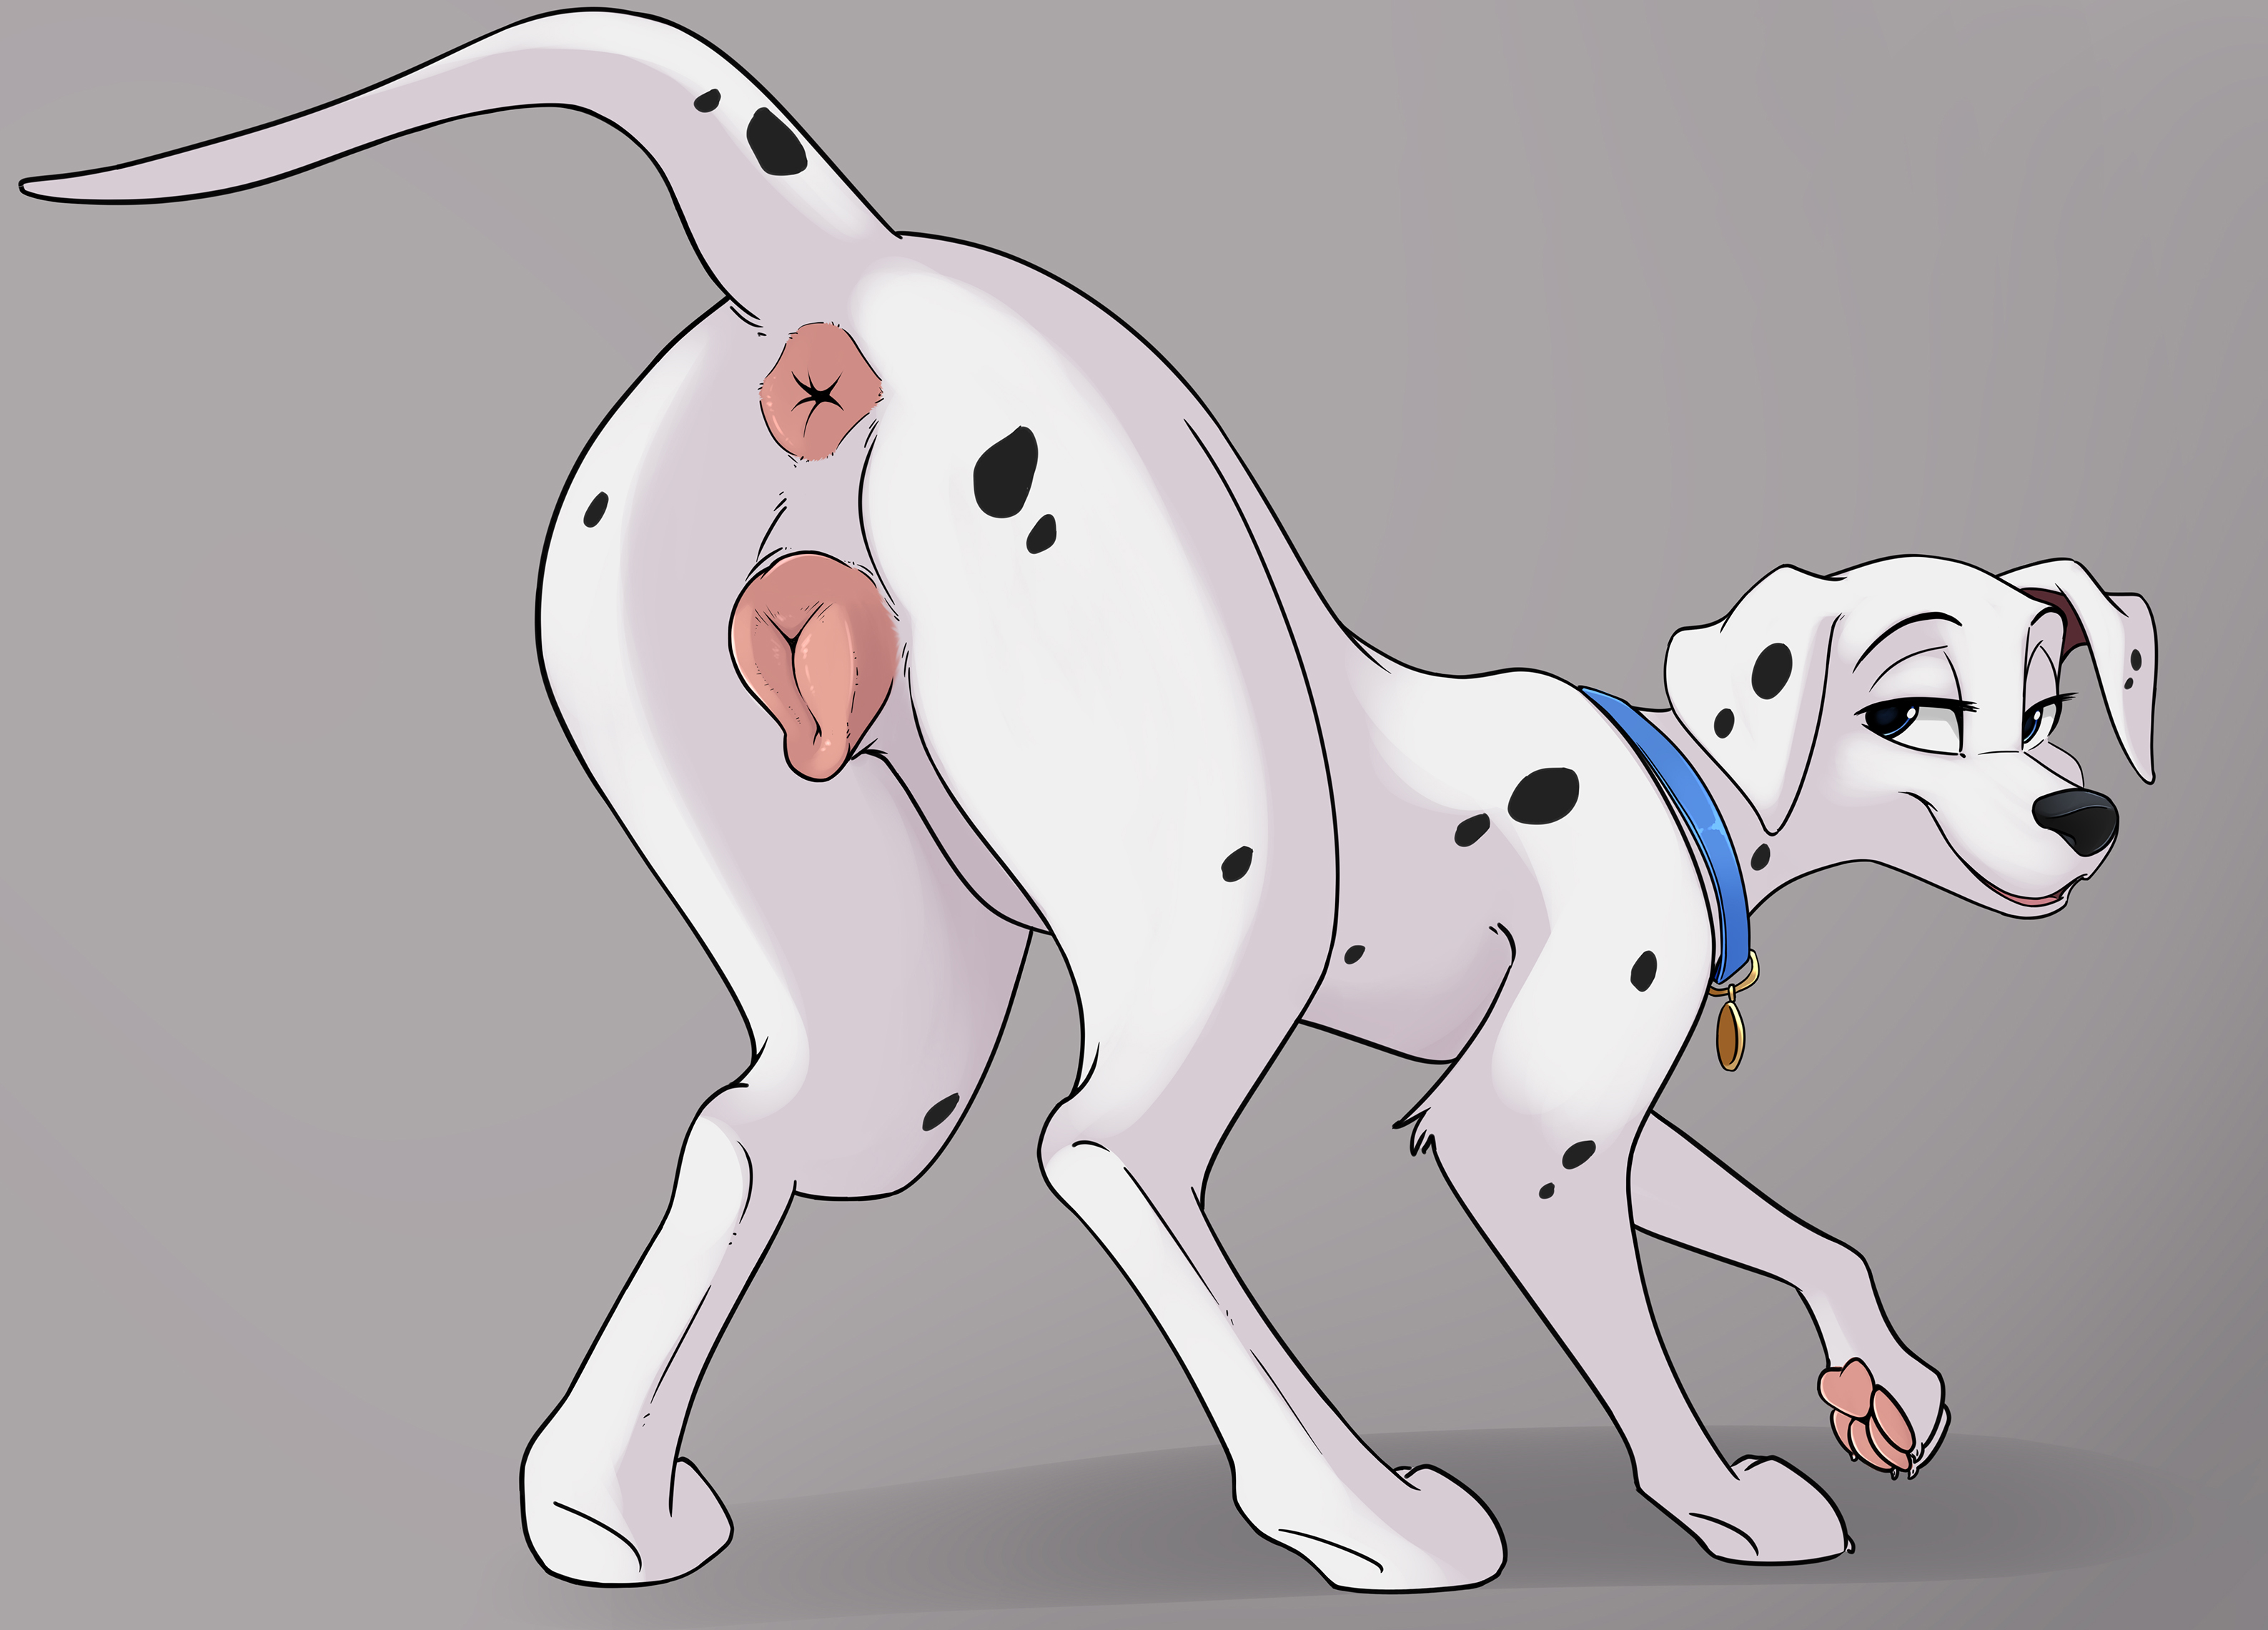 101 dalmatians: a sizzling collection of erotic comics you cant miss